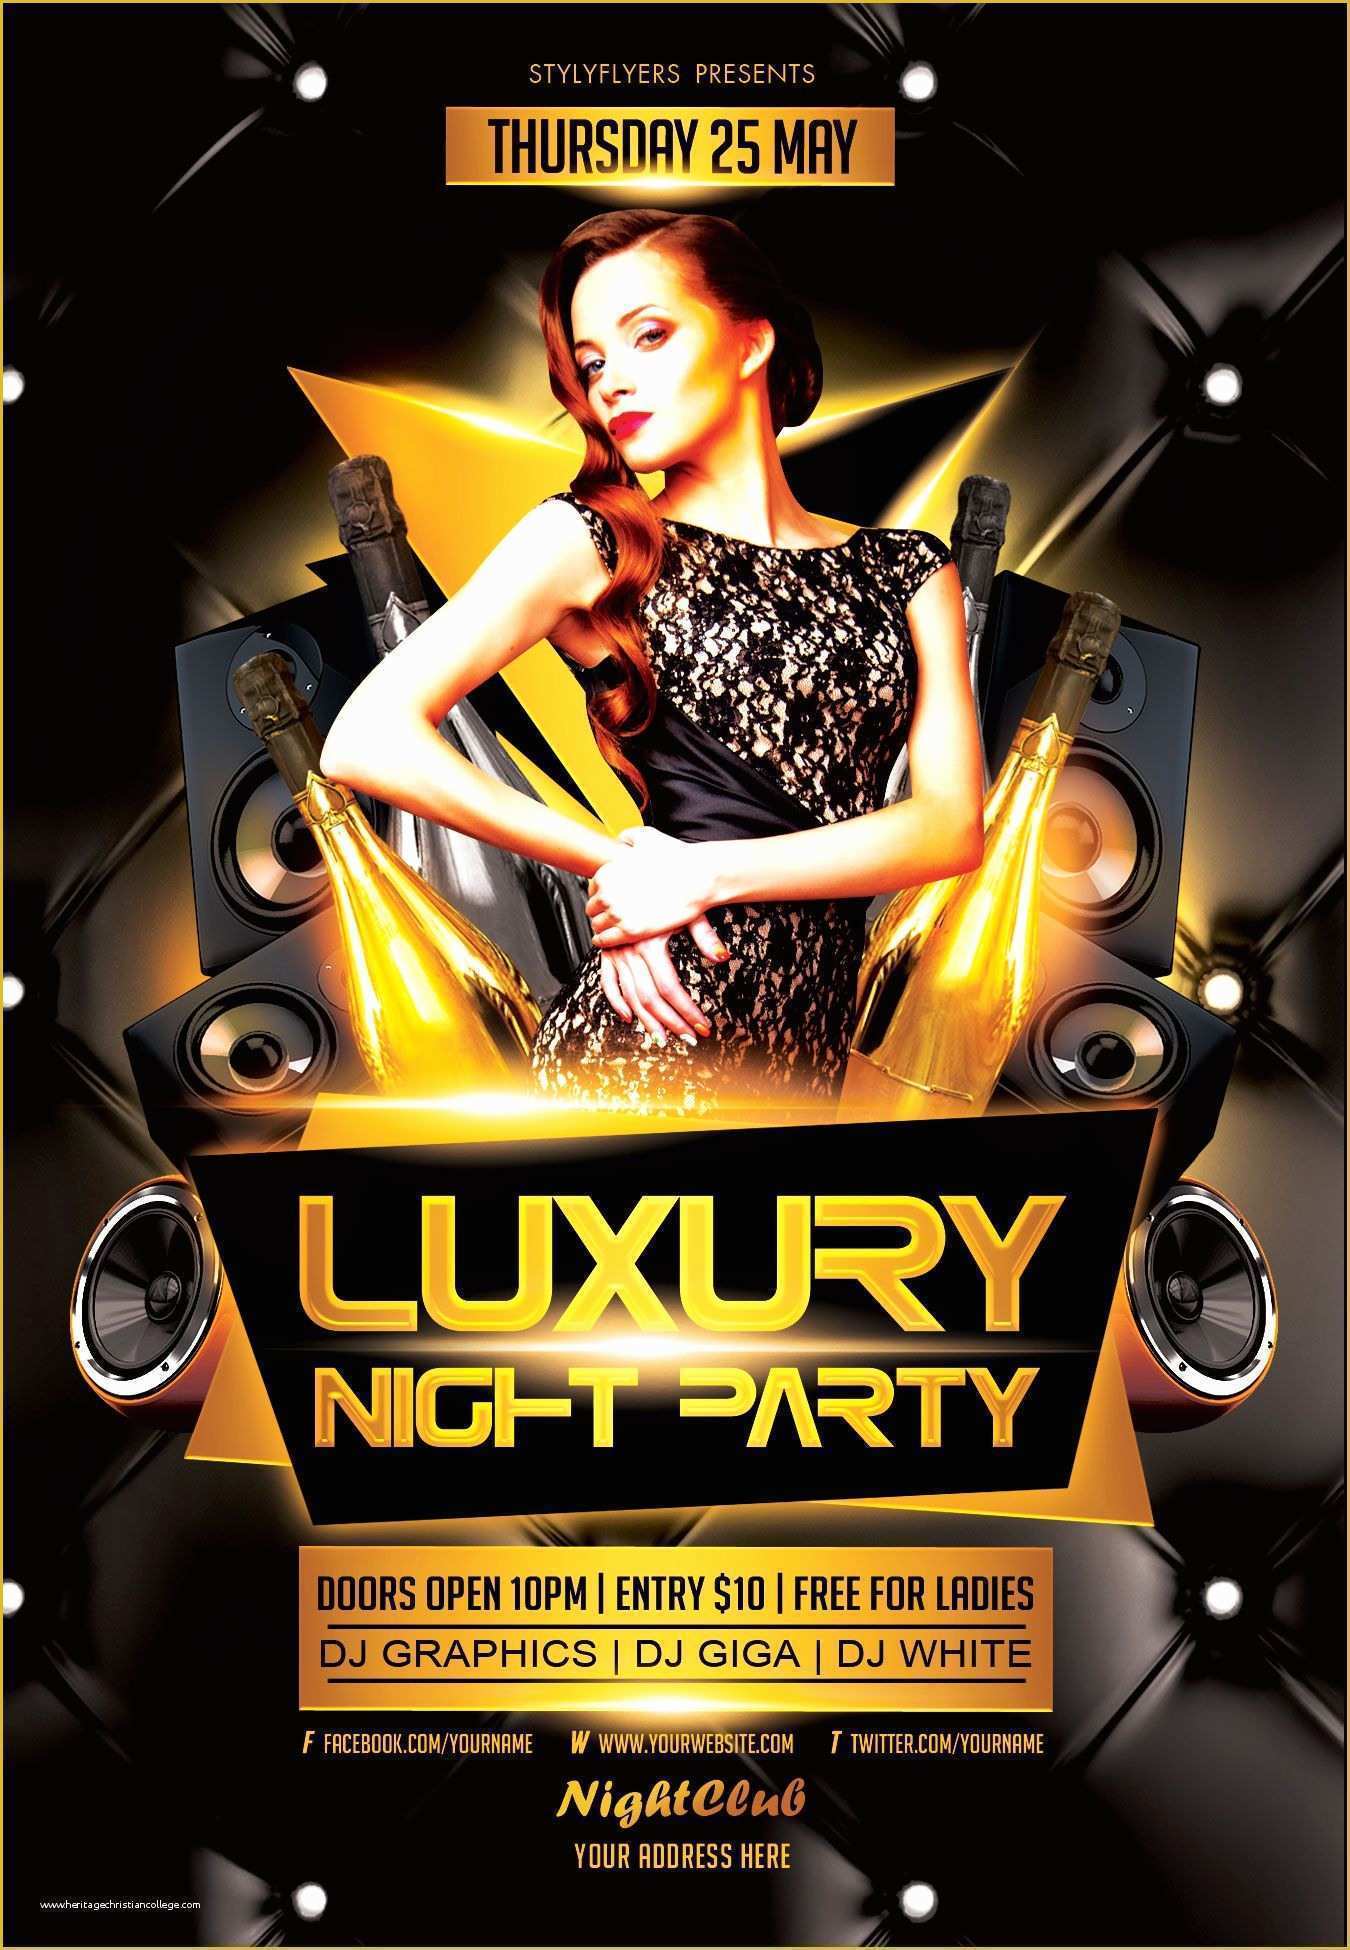 Party Flyer Template Free Download Of Free Luxury Night Party Flyer Psd Template by Styleflyer